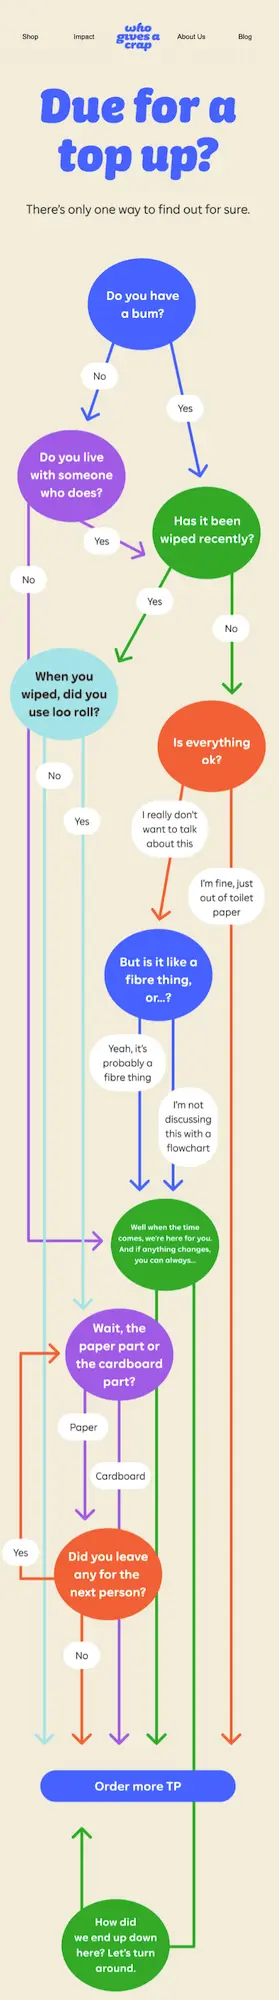 Image shows a long replenishment email automation from toilet paper supplier Who Gives A Crap, which takes readers through a complicated but hilarious flow chart that asks whether they’re “due for a top up.” At the bottom of the flow chart is a simple CTA button: “order more TP.”